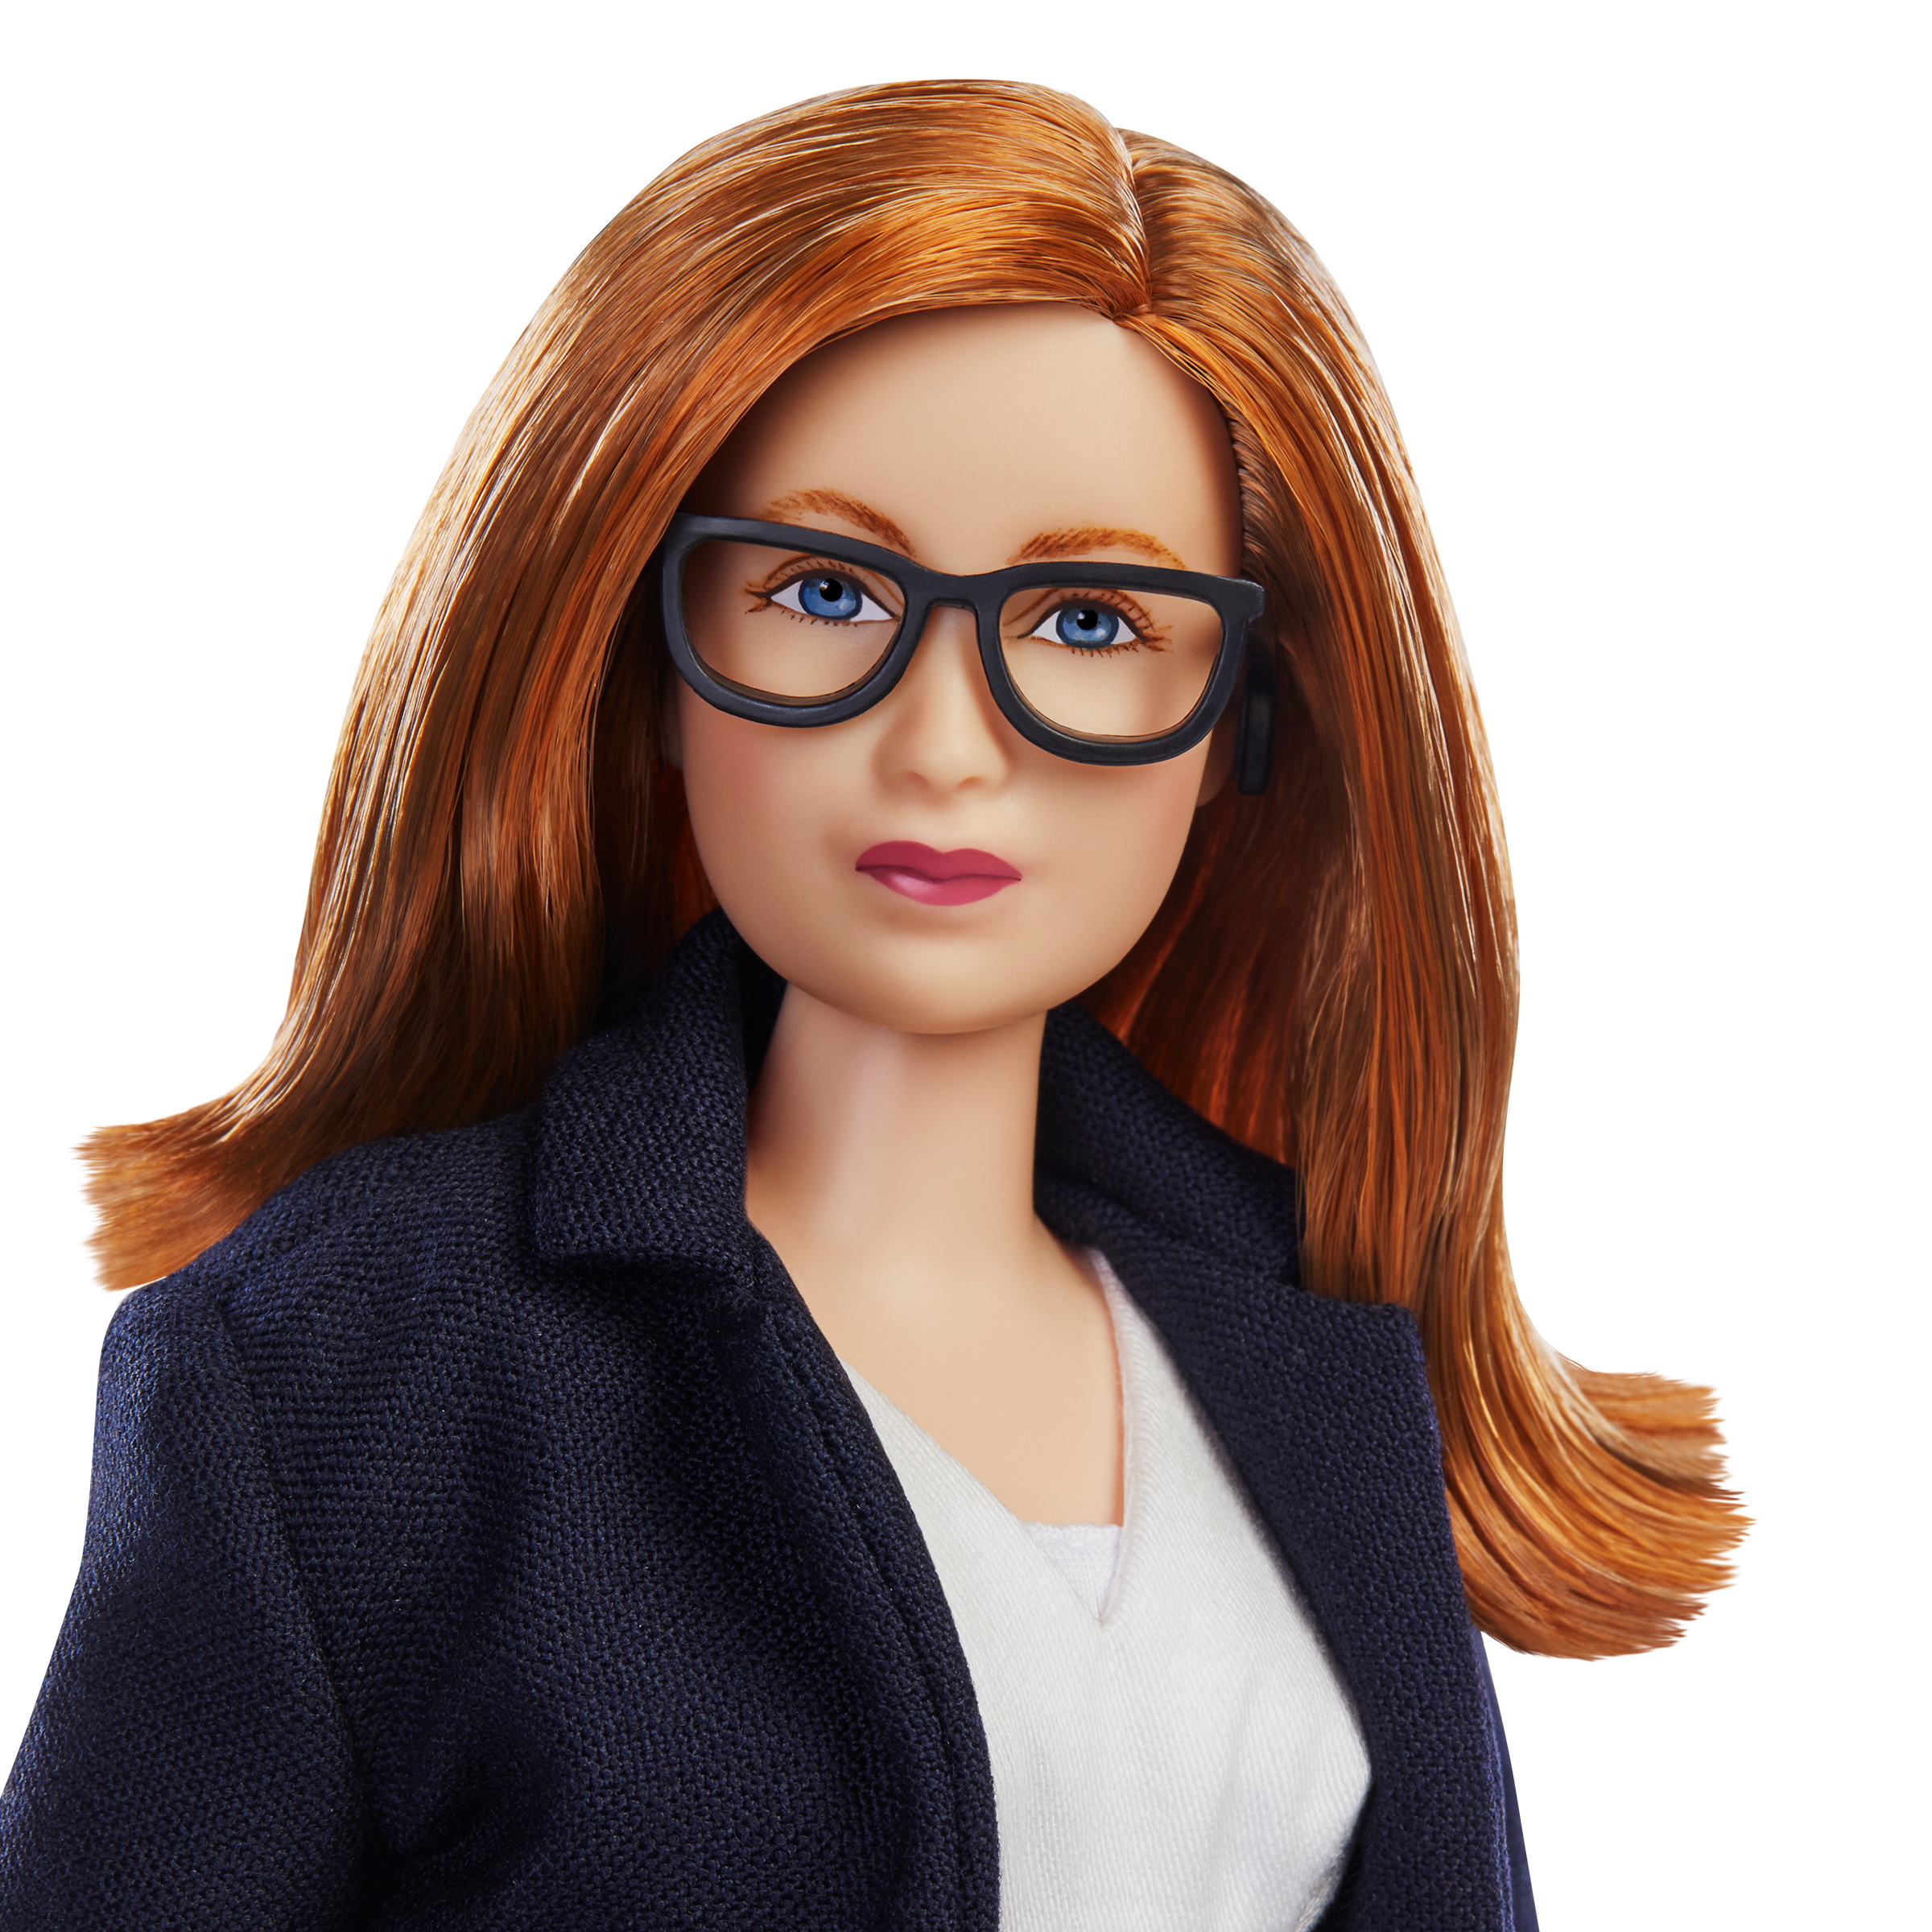 Agricultural Supermarket bronze Barbie debuts doll in likeness of British COVID-19 vaccine developer |  Reuters